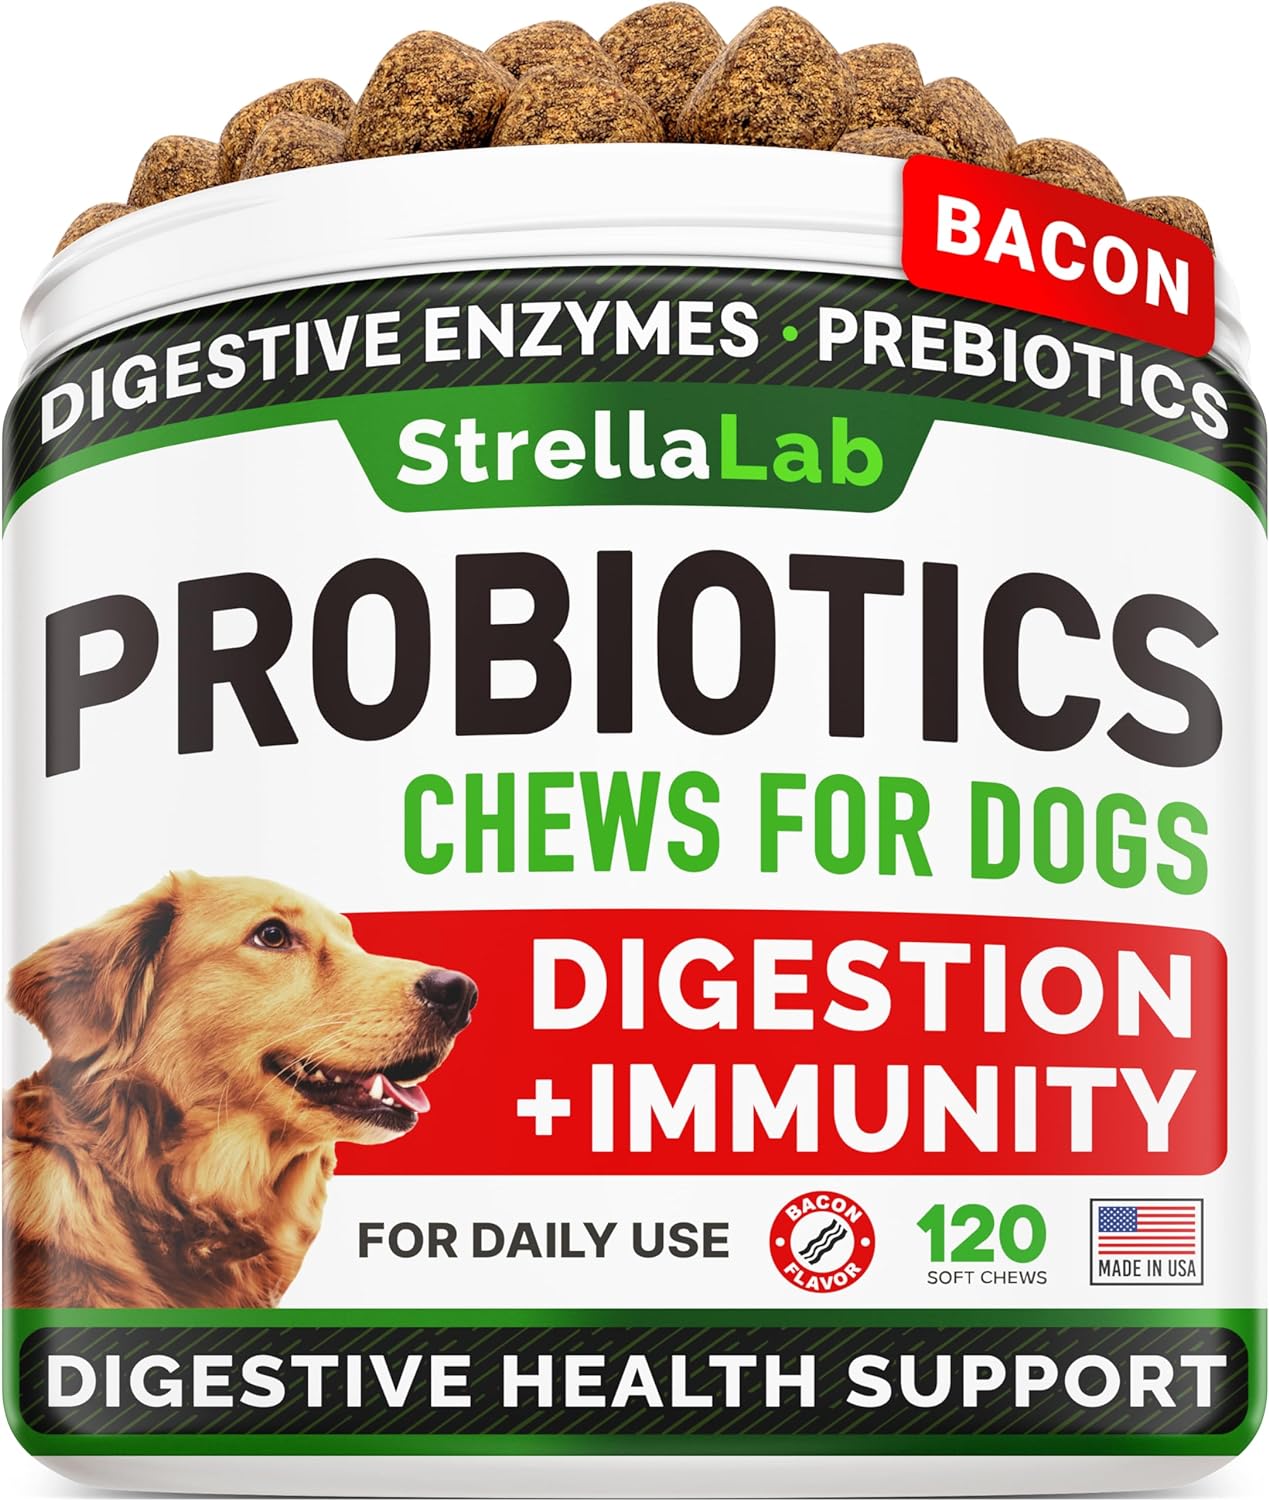 StrellaLab Dog Probiotics Treats for Picky Eaters - Digestive Enzymes + Prebiotics - Chewable Fiber Supplement - Allergy, Diarrhea, Gas, Constipation, Upset Stomach Relief - Improve Digestion&Immunity